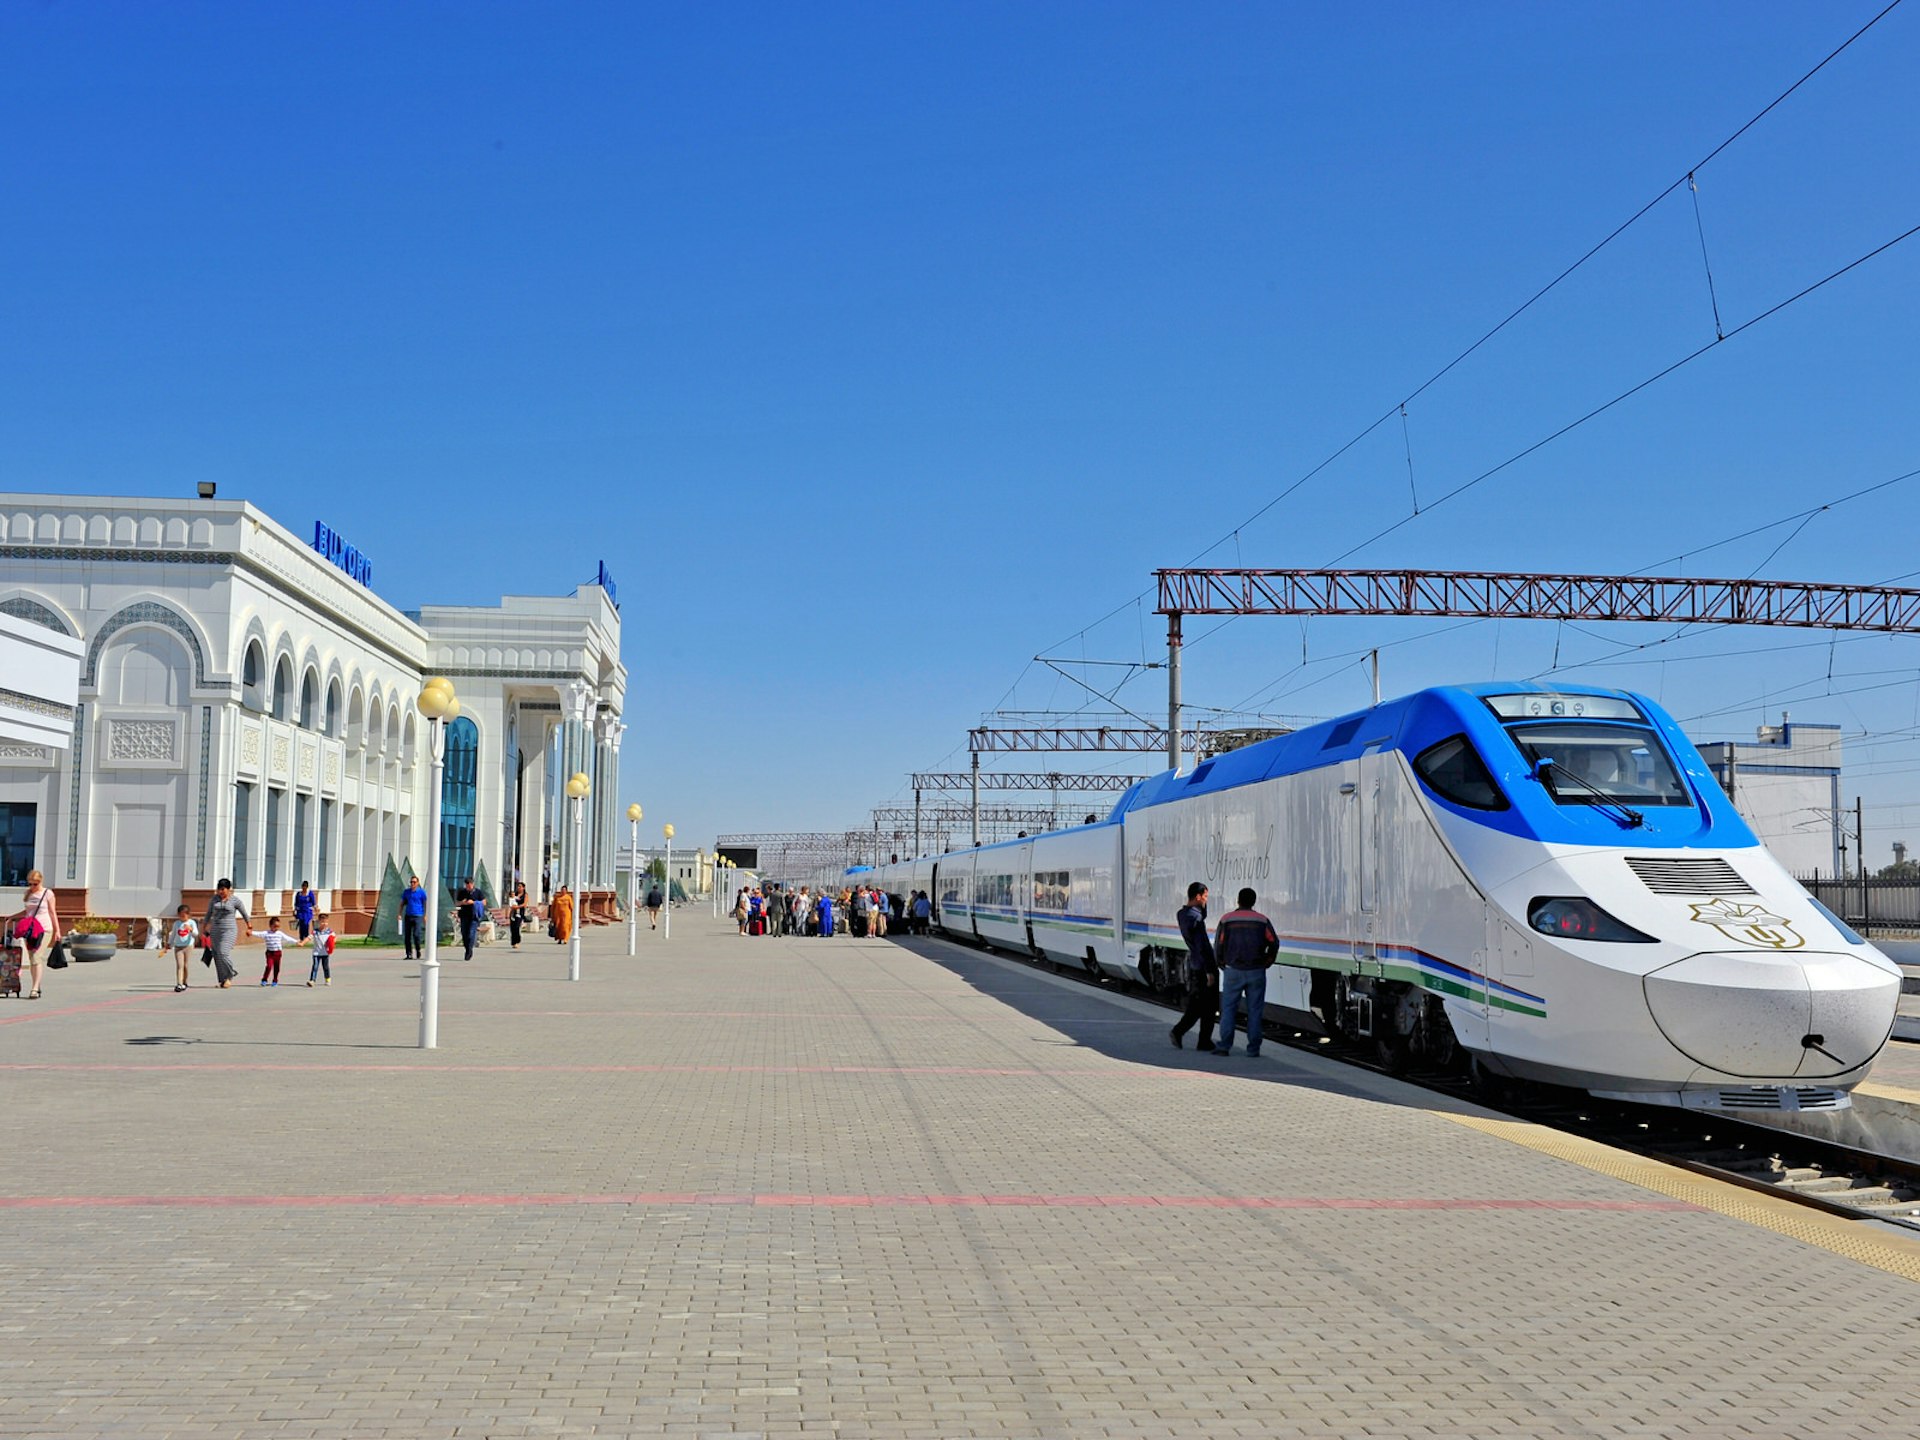 A blue and white long-nosed train stands on the platform at a white train station building. Bukhara station: the high-speed train line linking Bukhara and Samarkand opened in 2016 © Julia Drugova / Shutterstock